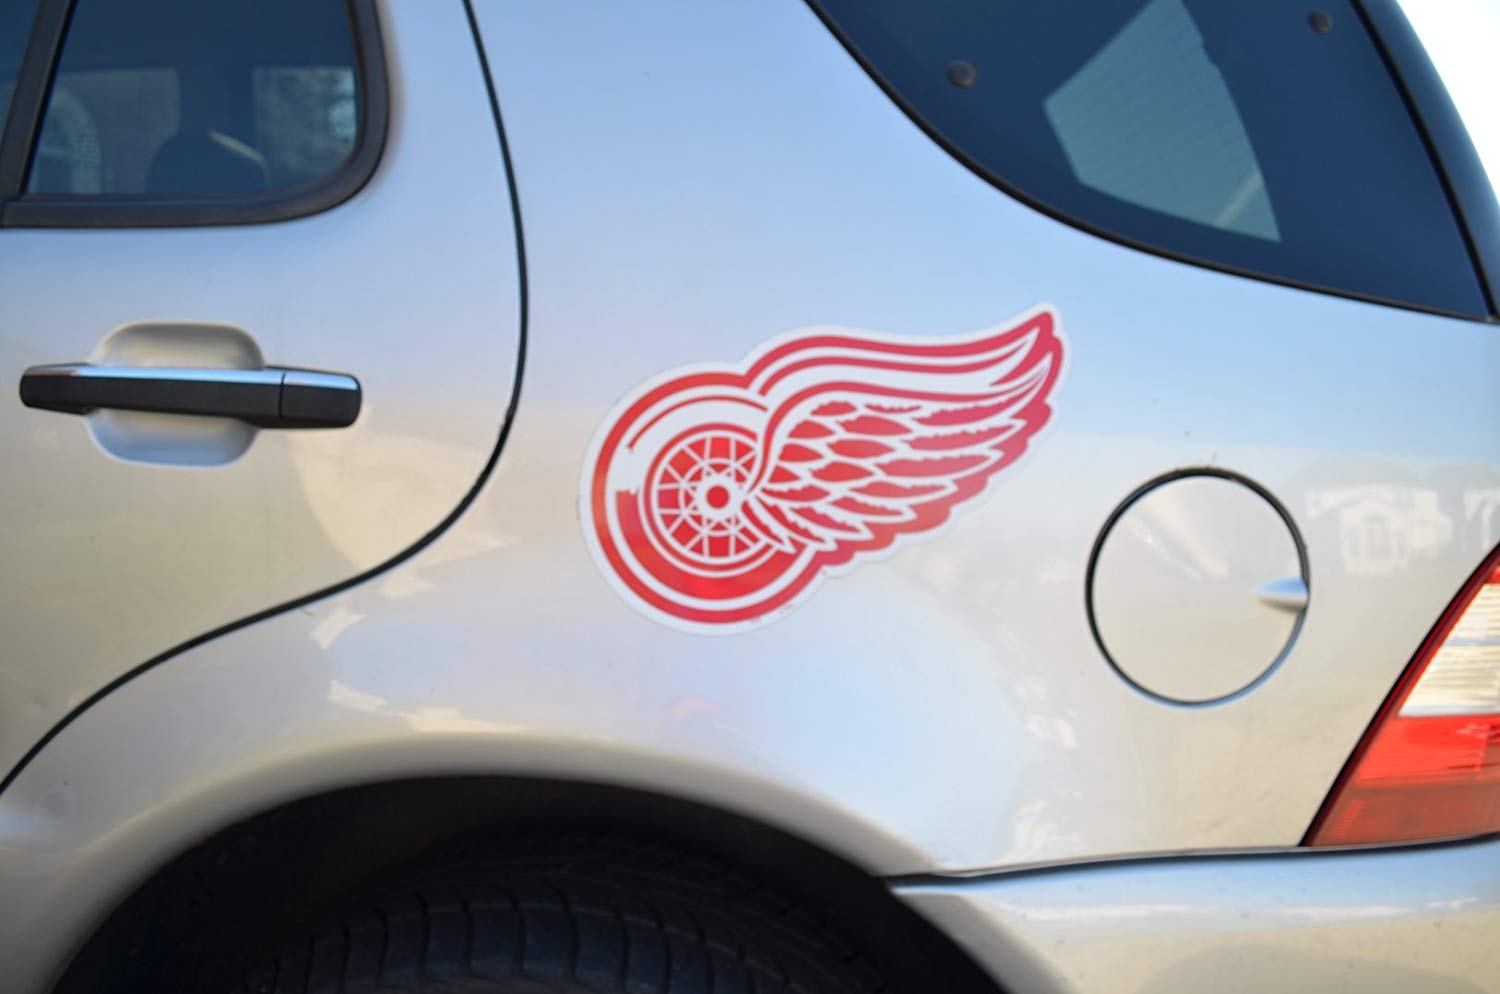 NHL Jumbo Auto Magnet (Detroit Red Wings)